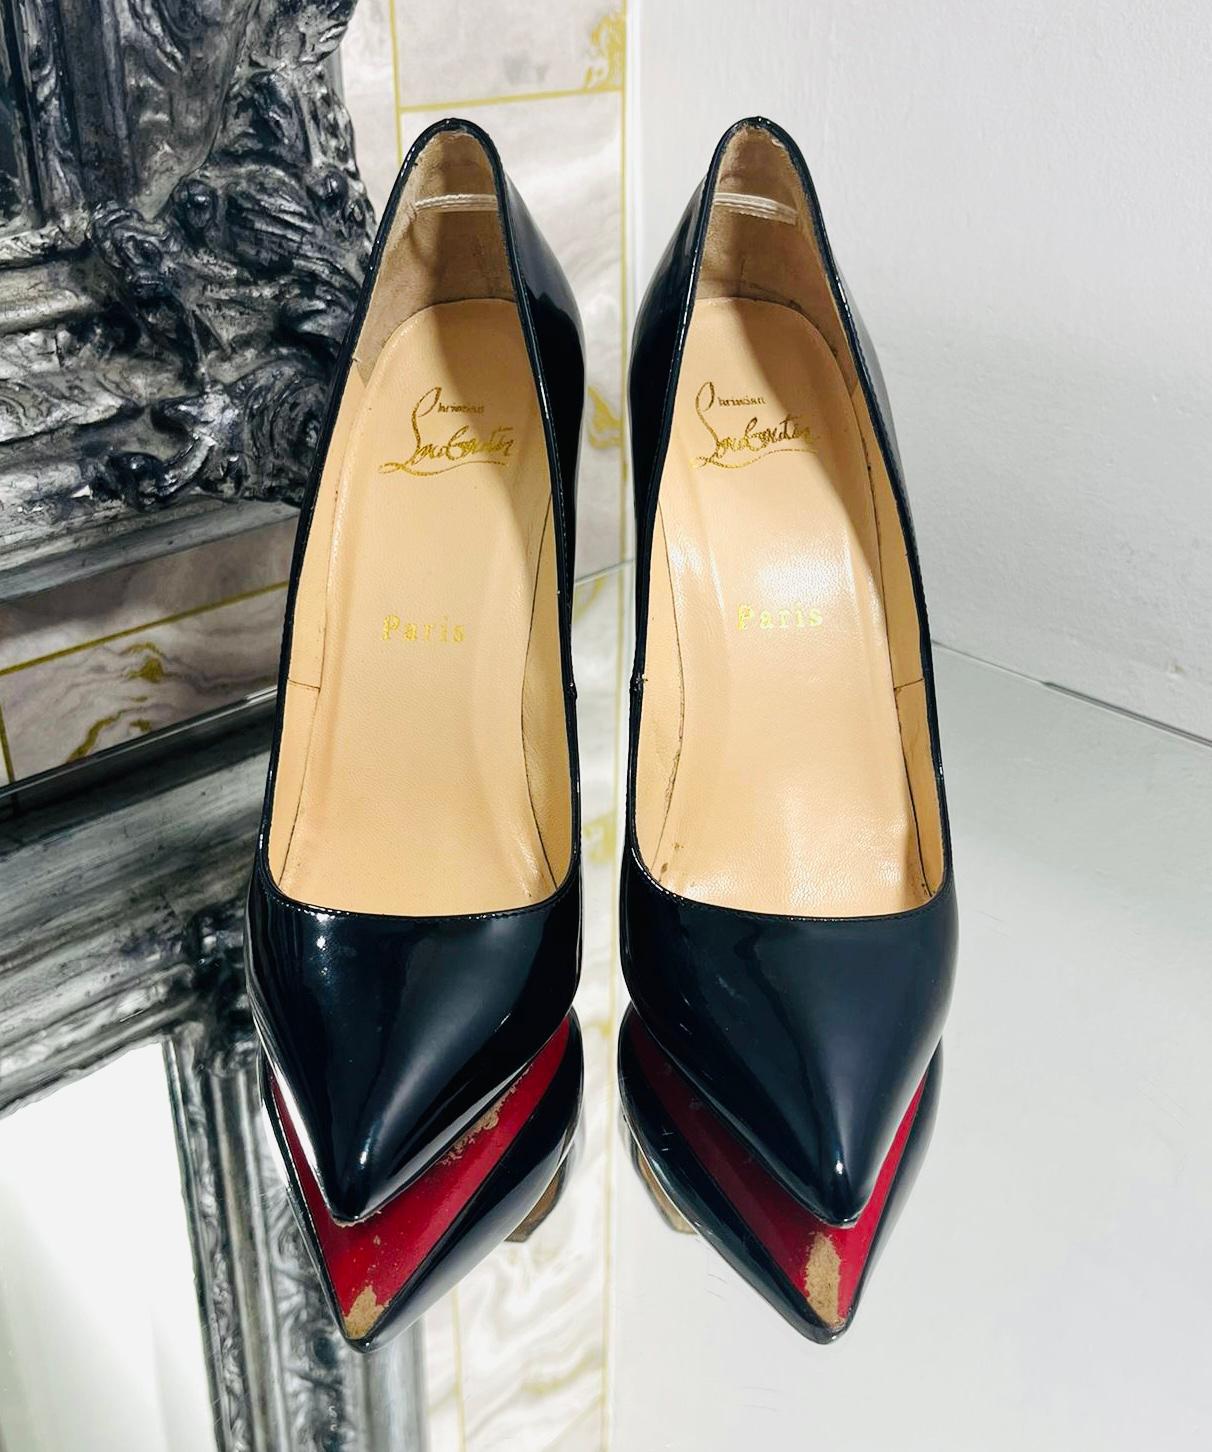 Christian Louboutin 100 Patent Leather Heels

Classic, black heels designed with pointed toe and stiletto heel.

Detailed with iconic red soles and leather lining.

Size – 35

Condition – Very Good

Composition – Patent Leather